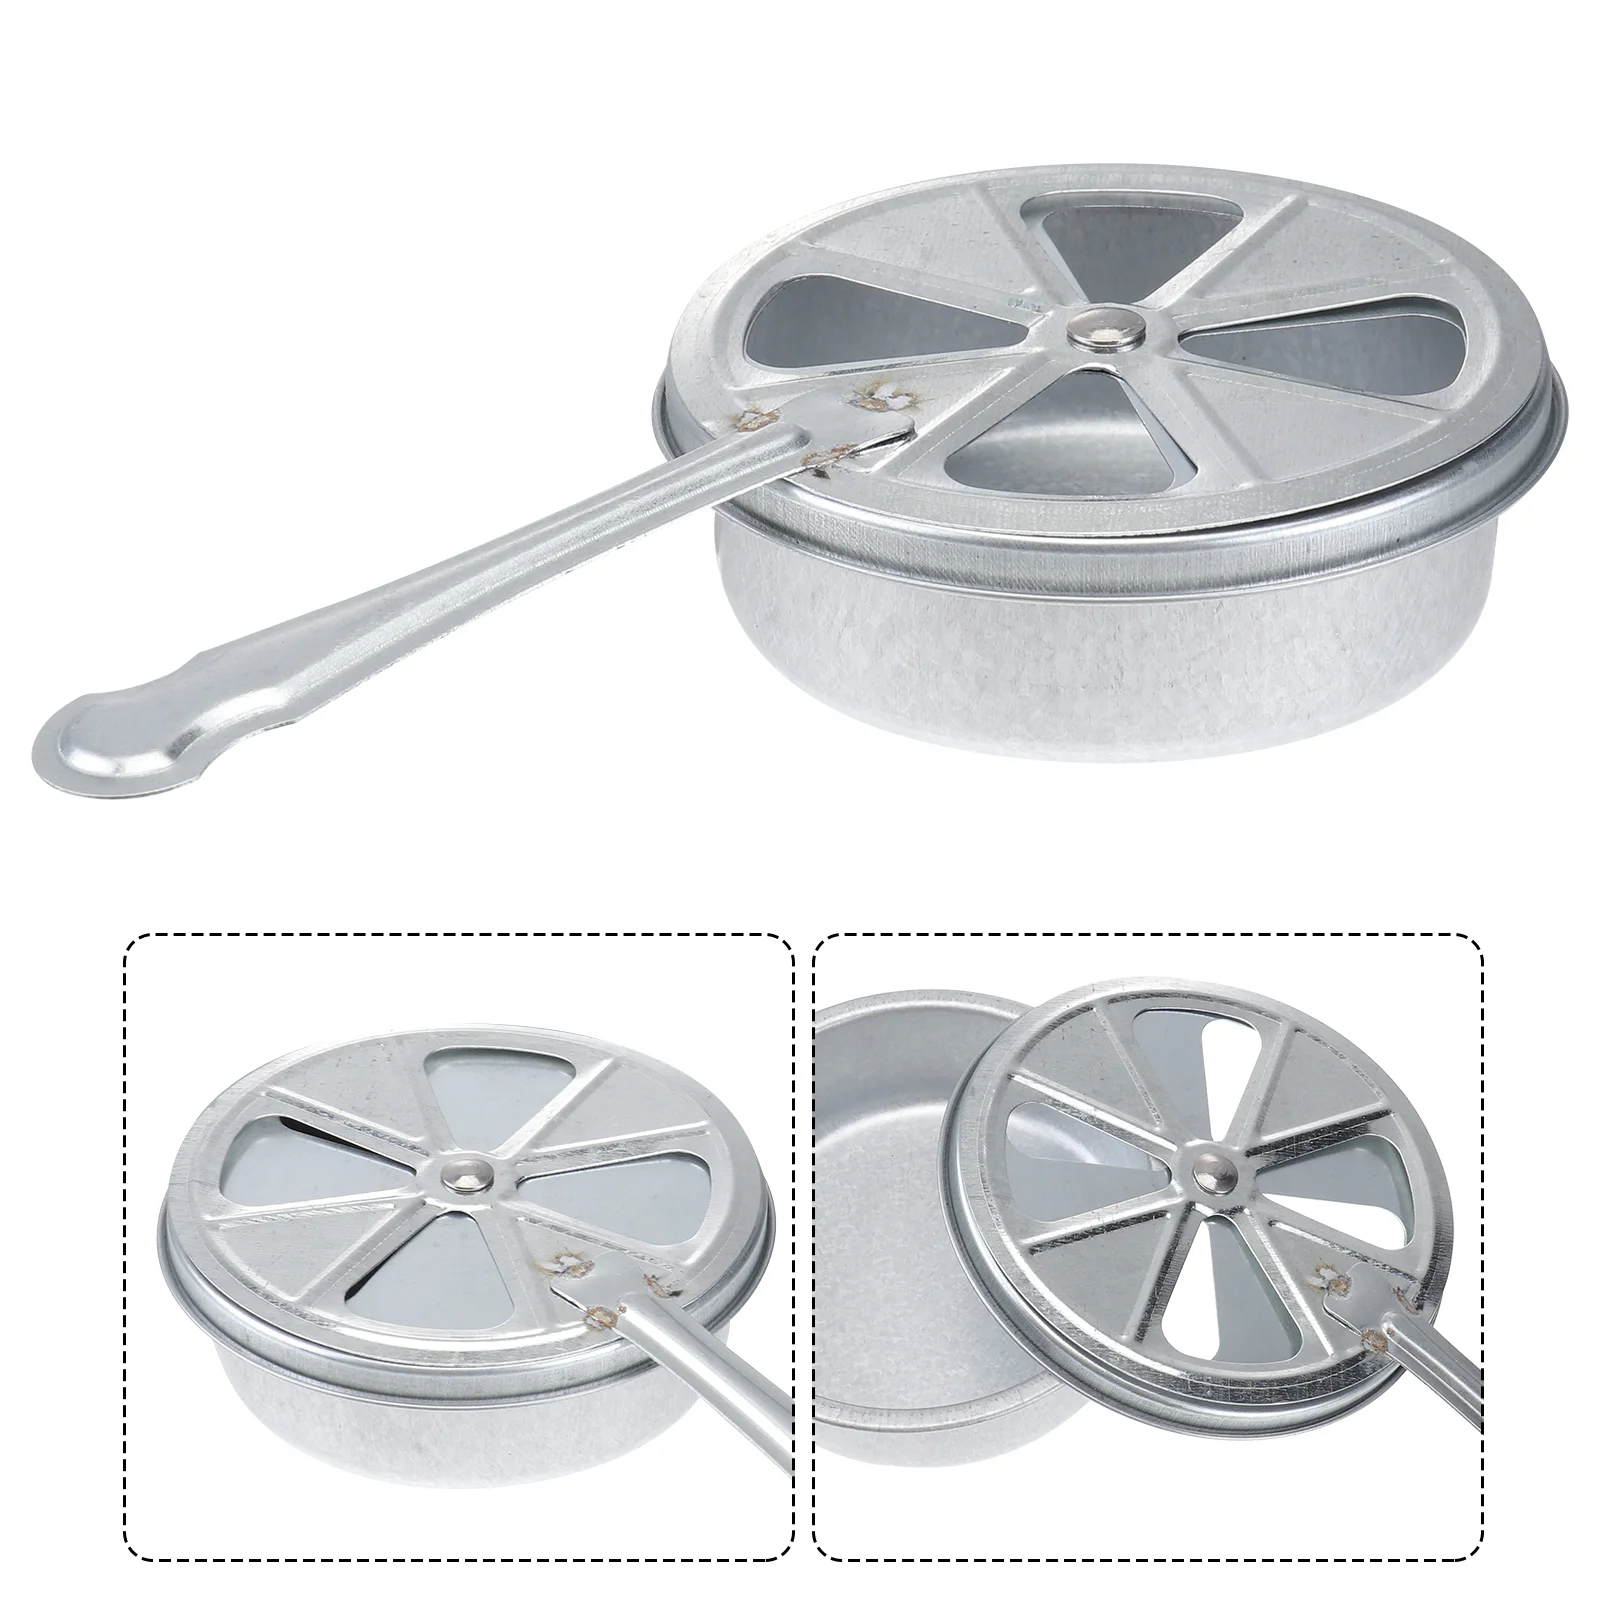 

1pc Fire Stove Burner Camping Oven Hot Pot Fondue Burner Stove Portable Outdoor Stove Stainless Steel Backpacking Stove